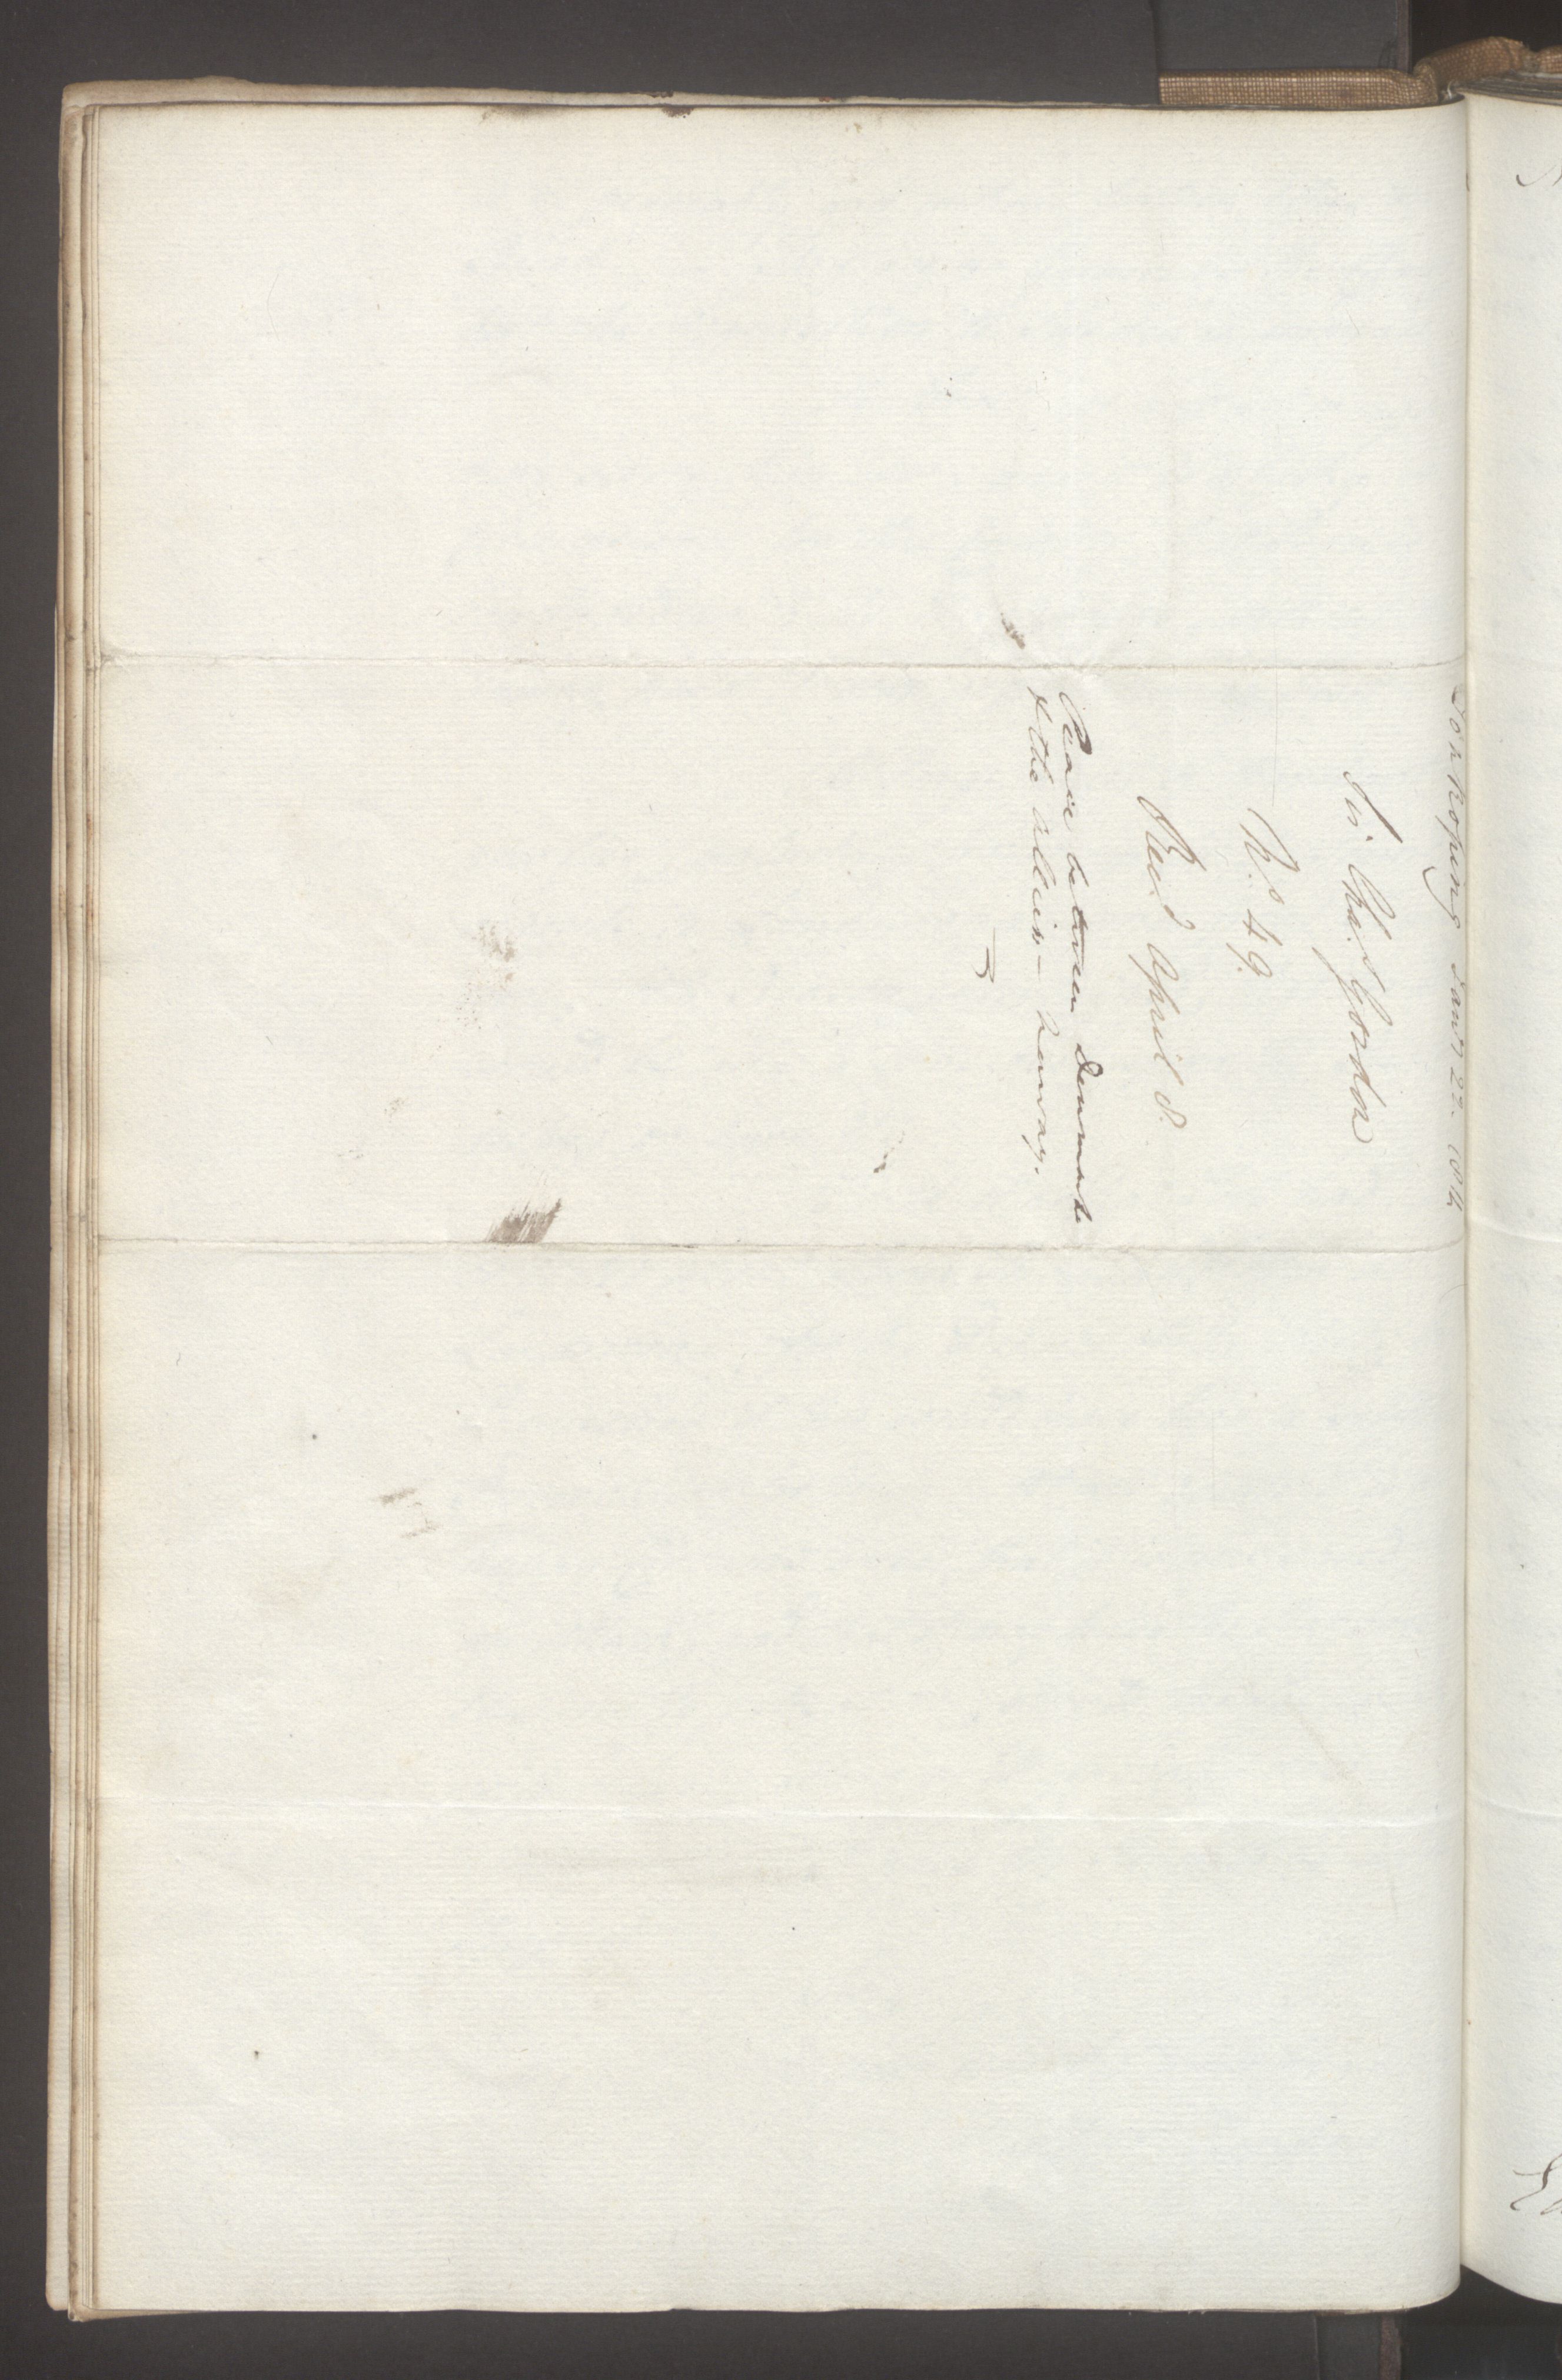 Foreign Office*, UKA/-/FO 38/16: Sir C. Gordon. Reports from Malmö, Jonkoping, and Helsingborg, 1814, p. 13